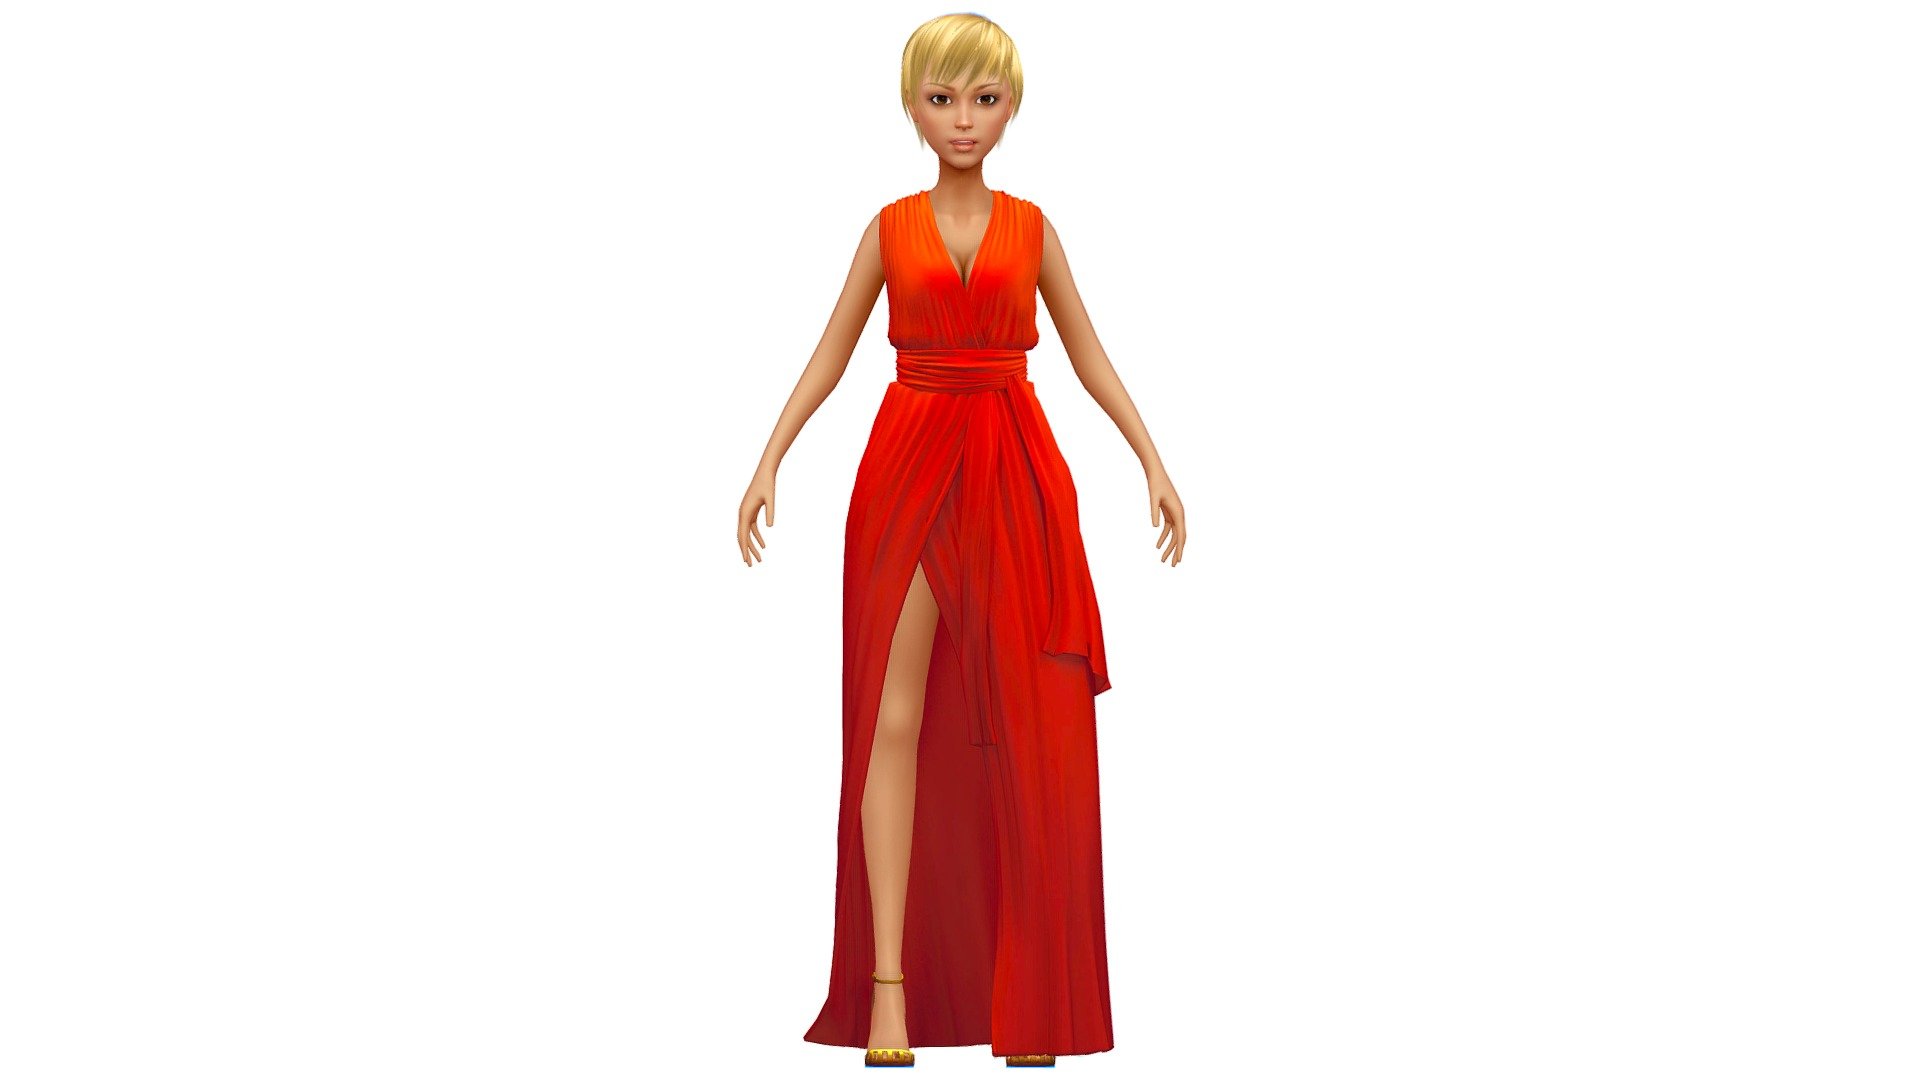 you can combine and match other combinations using the collection:

hair collection - https://skfb.ly/ovqTn

clotch collection - https://skfb.ly/ovqT7

lowpoly avatar collection - https://skfb.ly/ovqTu - Cartoon High Poly Subdivision Red Dress - Buy Royalty Free 3D model by Oleg Shuldiakov (@olegshuldiakov) 3d model